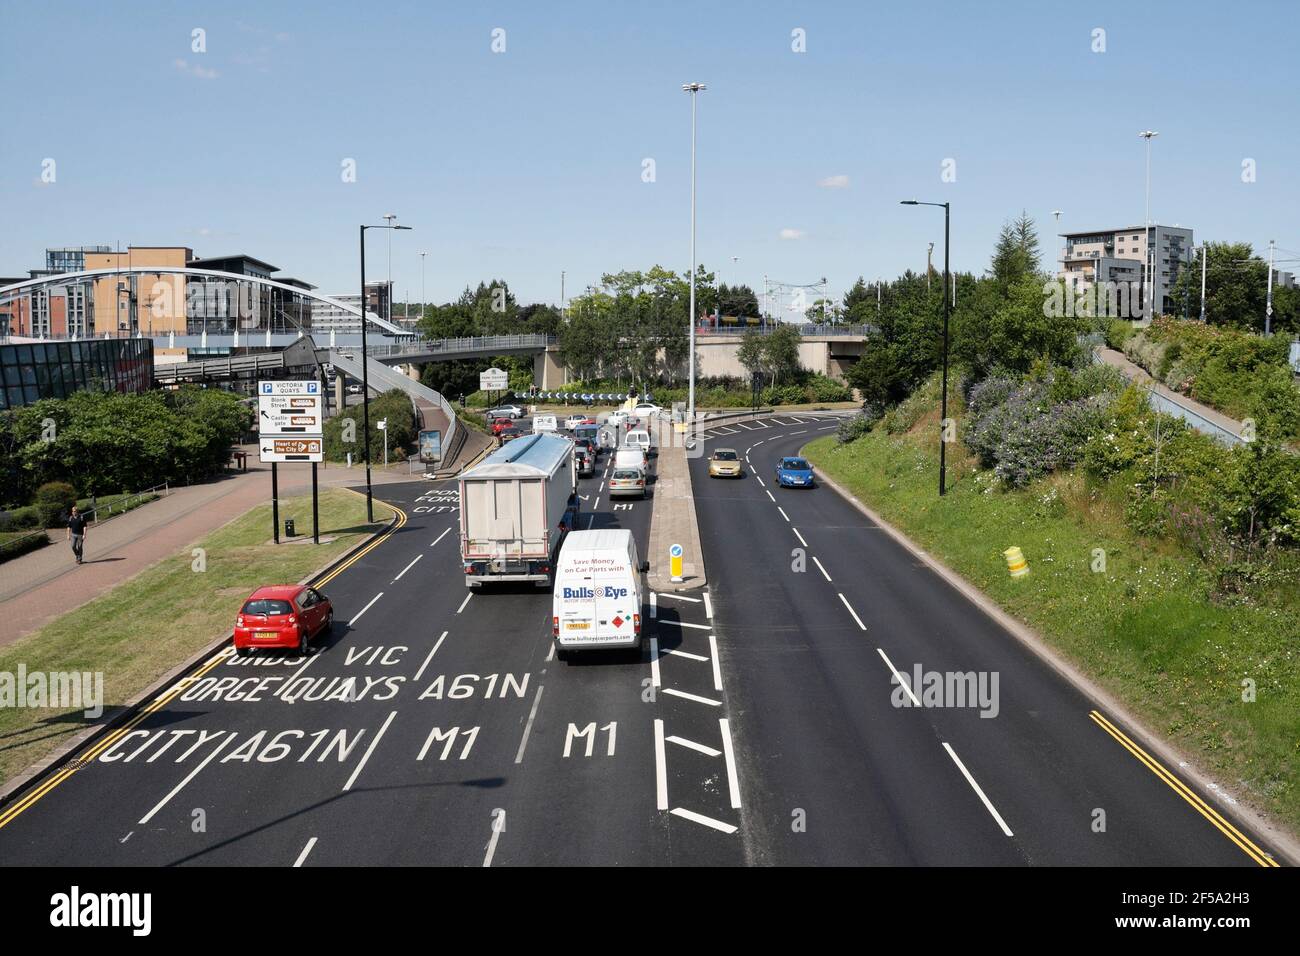 Sheffield city centre Inner ring road A61 towards Ponds forge roundabout. England Stock Photo